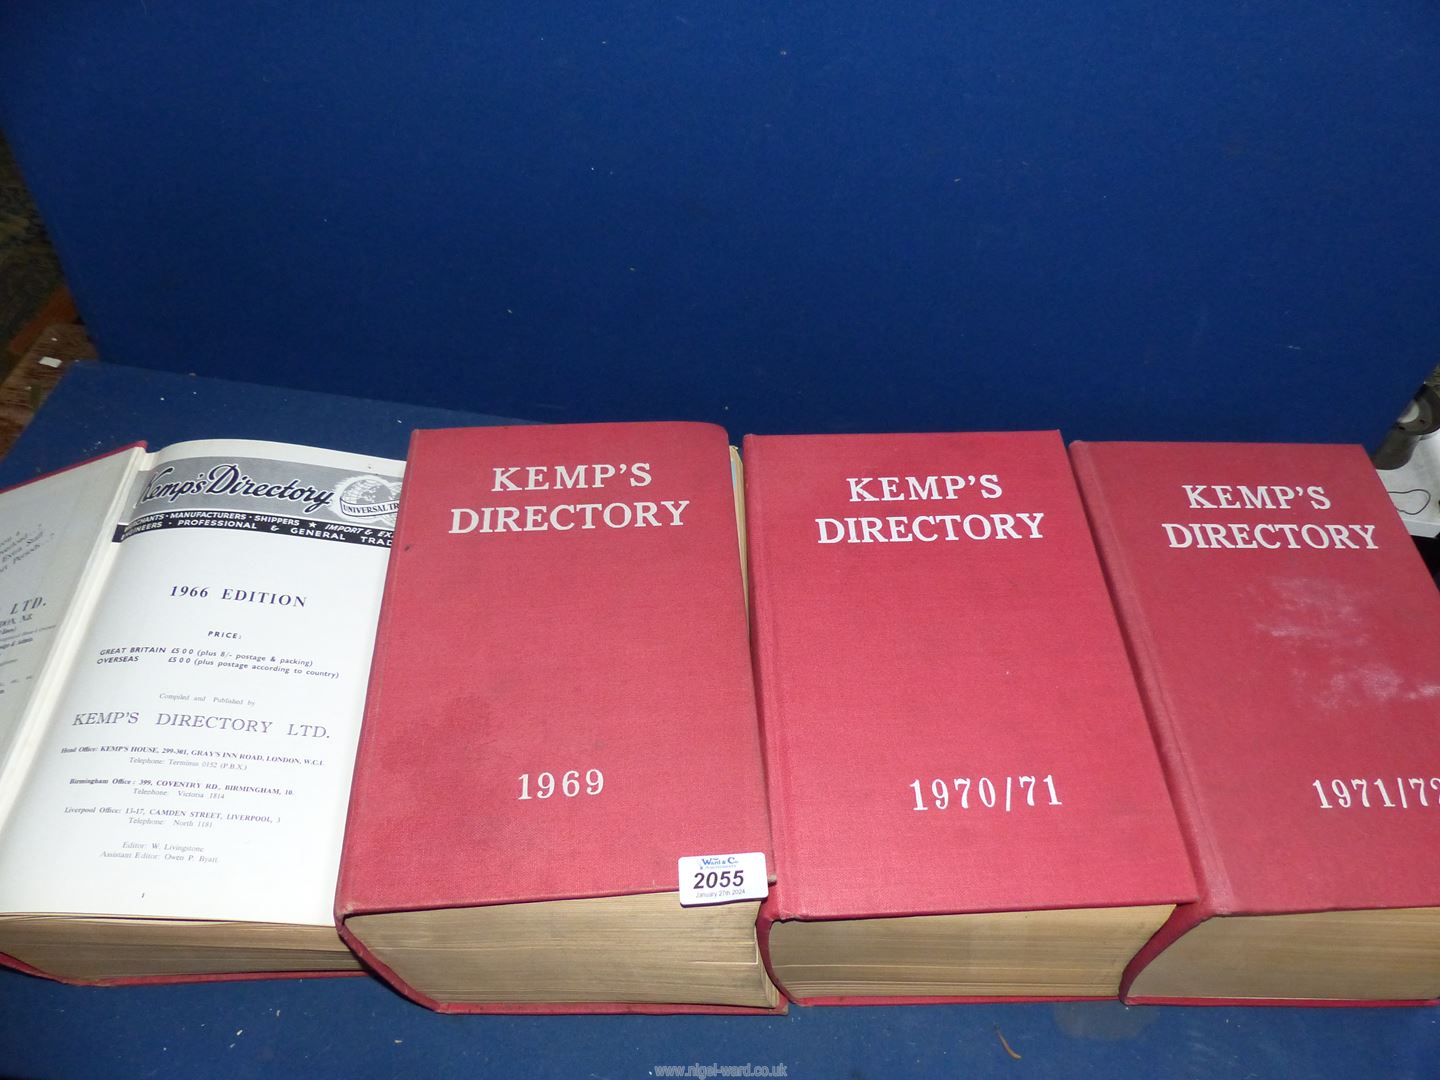 Four volumes of Kemp's Directory Ltd. dating 1966, '69, '70, '71 and '71/'72.